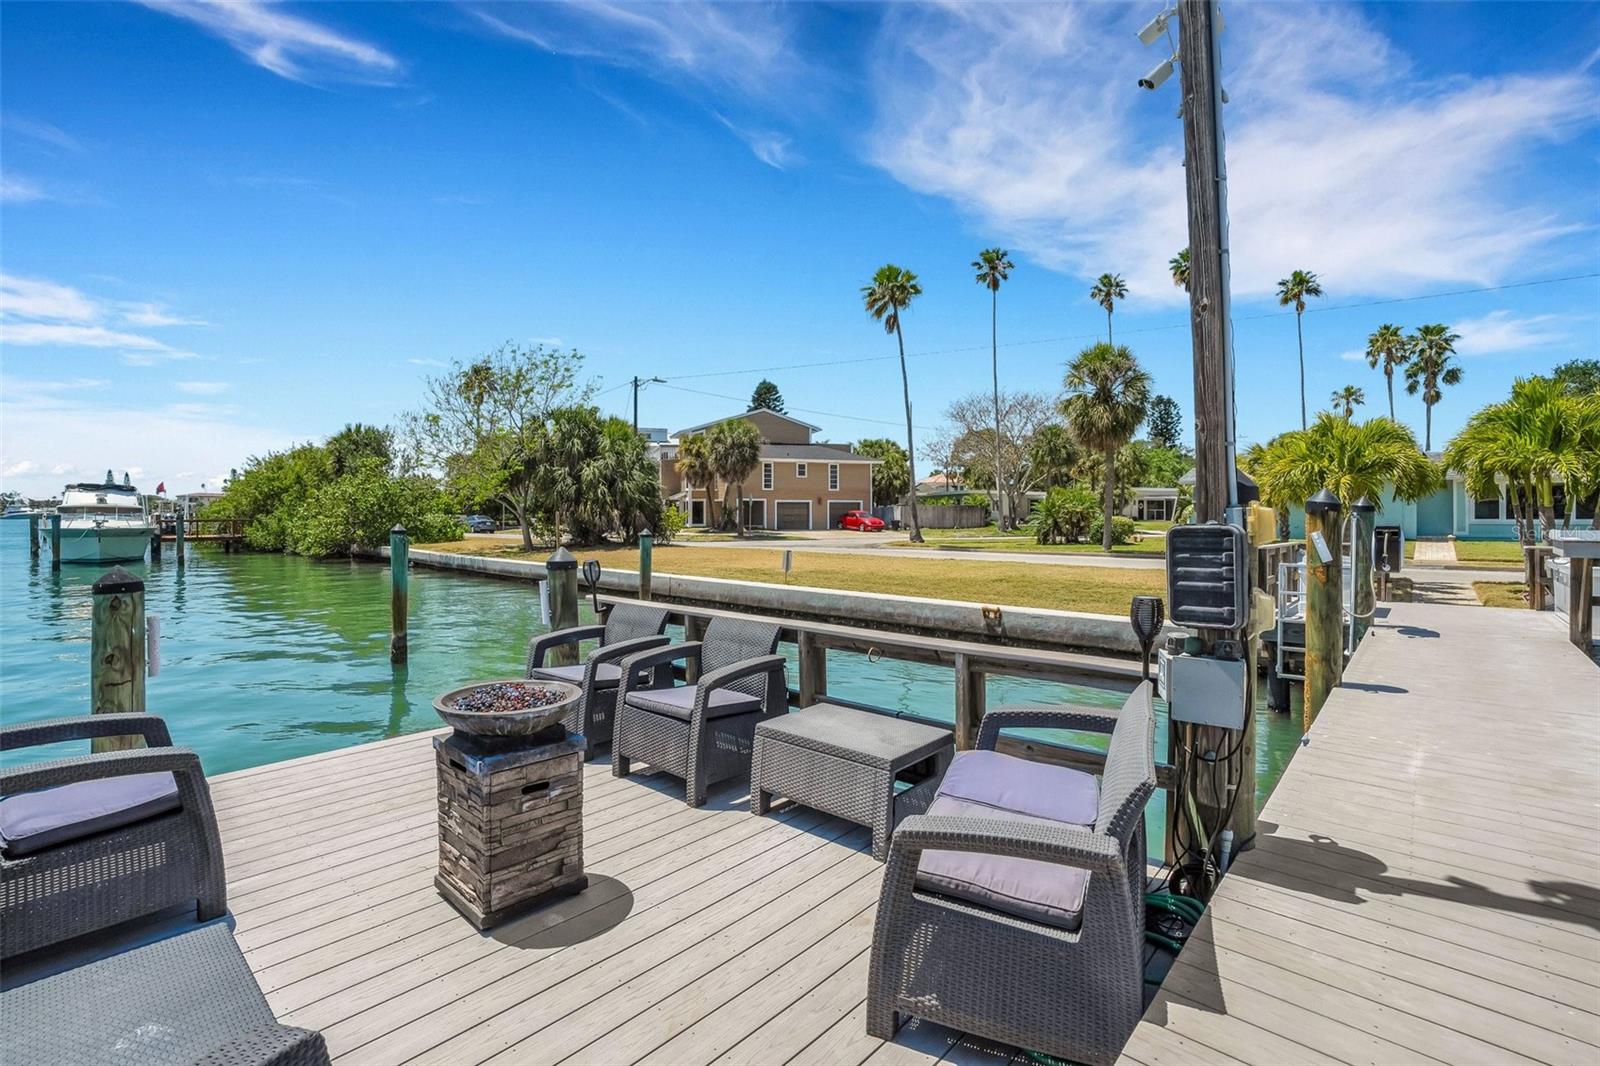 Extra Large, multi level deck to optimize your viewing of dolphins, manatees and you can even fish right off the dock.  Make from Trex Composite Decking for minimal maintenance and extended life (unlike regular wood)